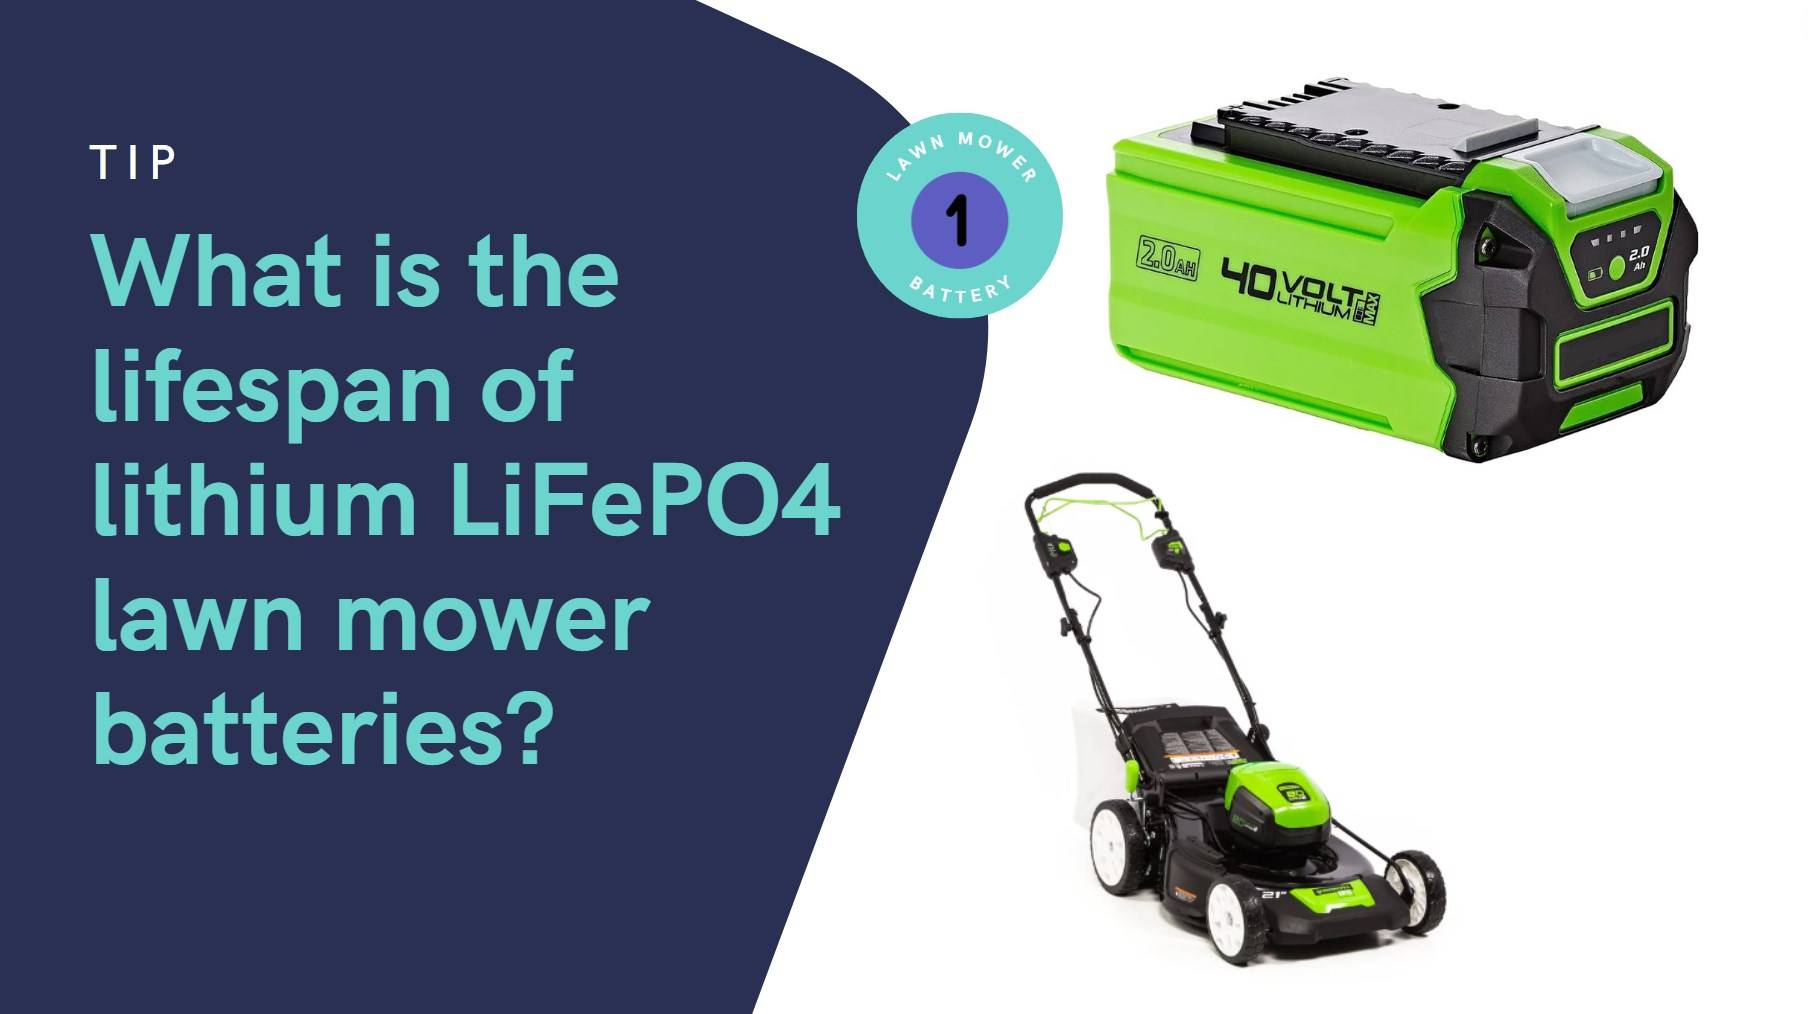 What is the lifespan of lithium LiFePO4 lawn mower batteries?